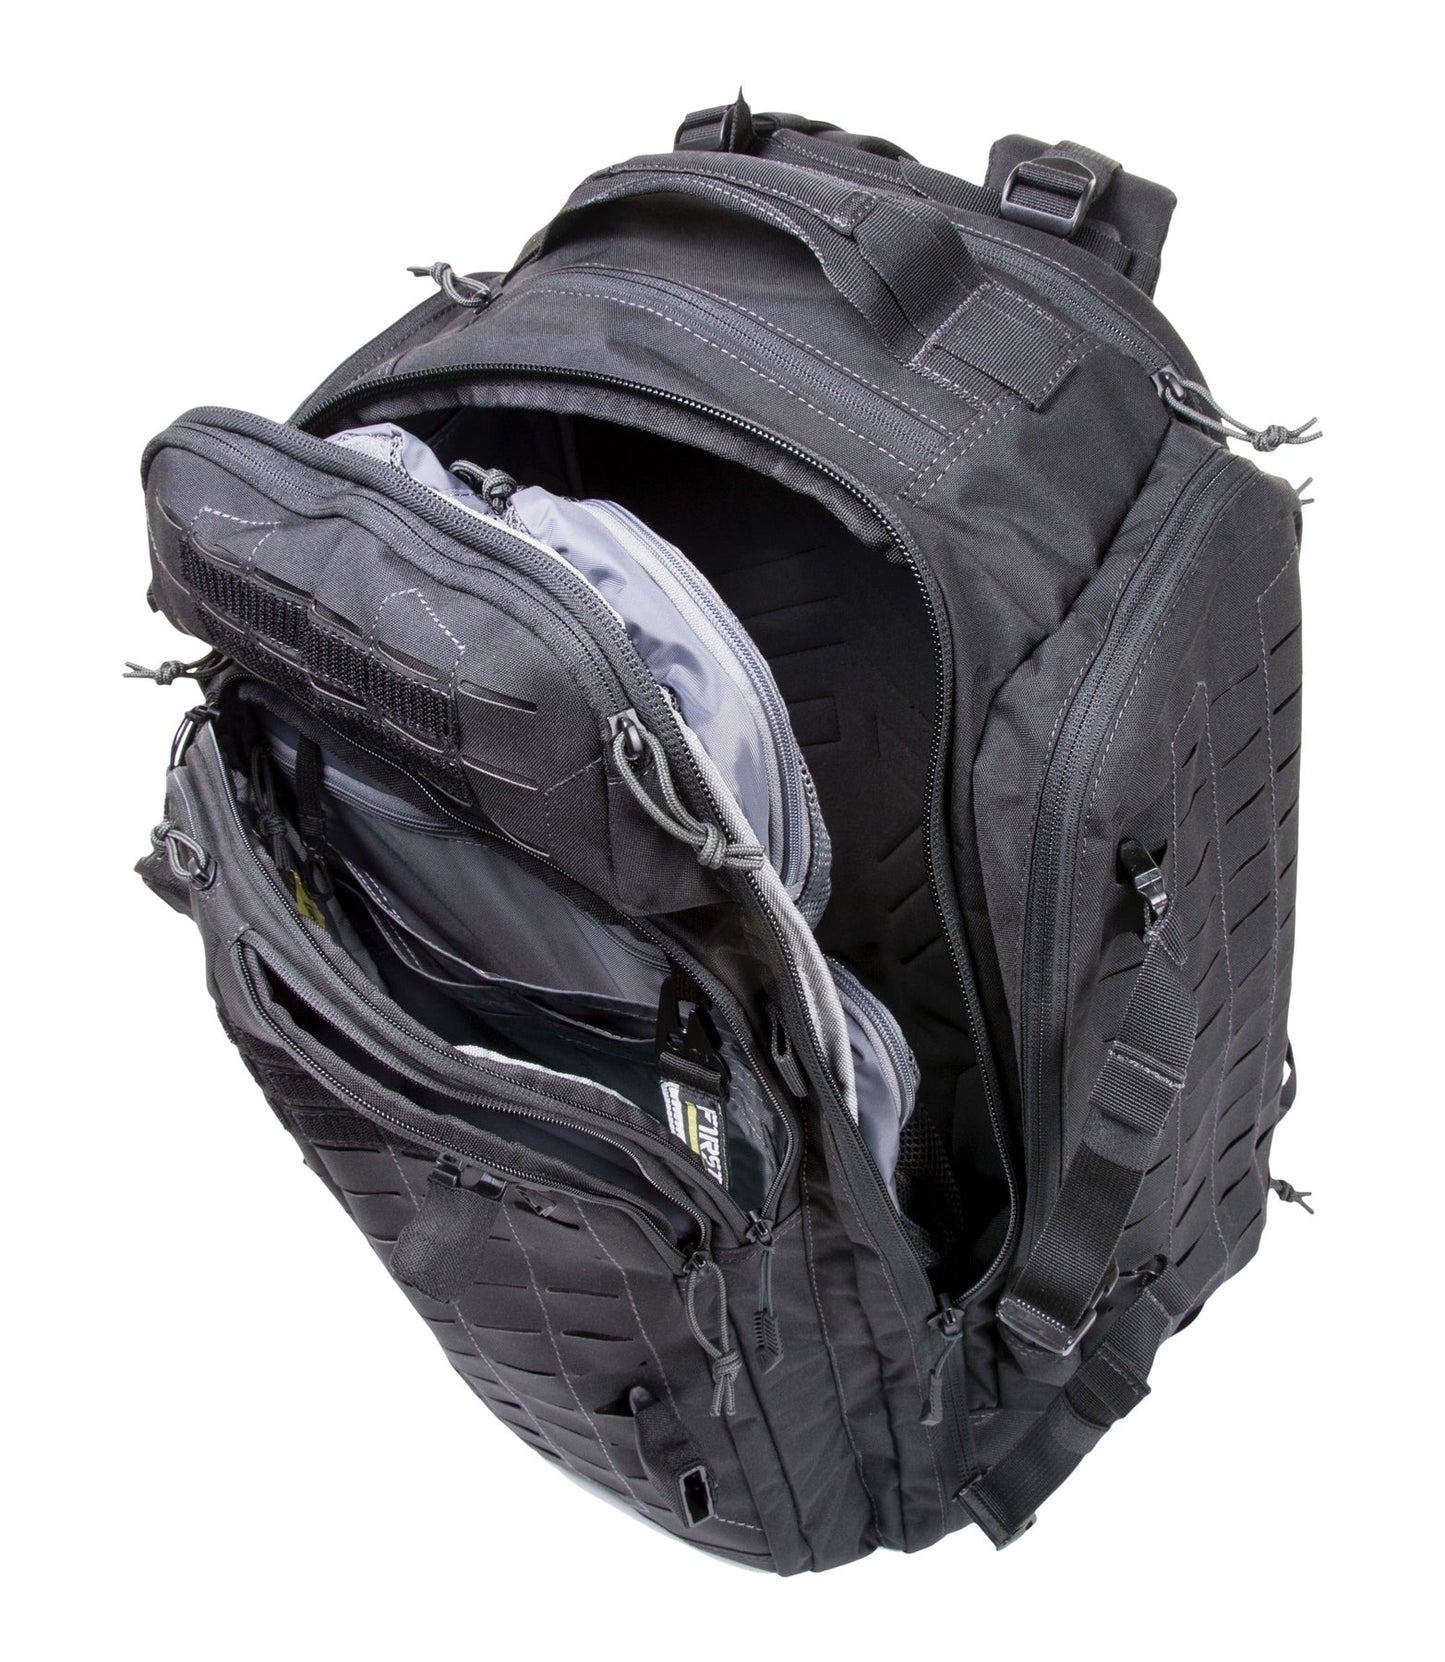 Tactix 3 Day Plus Backpack - 62L